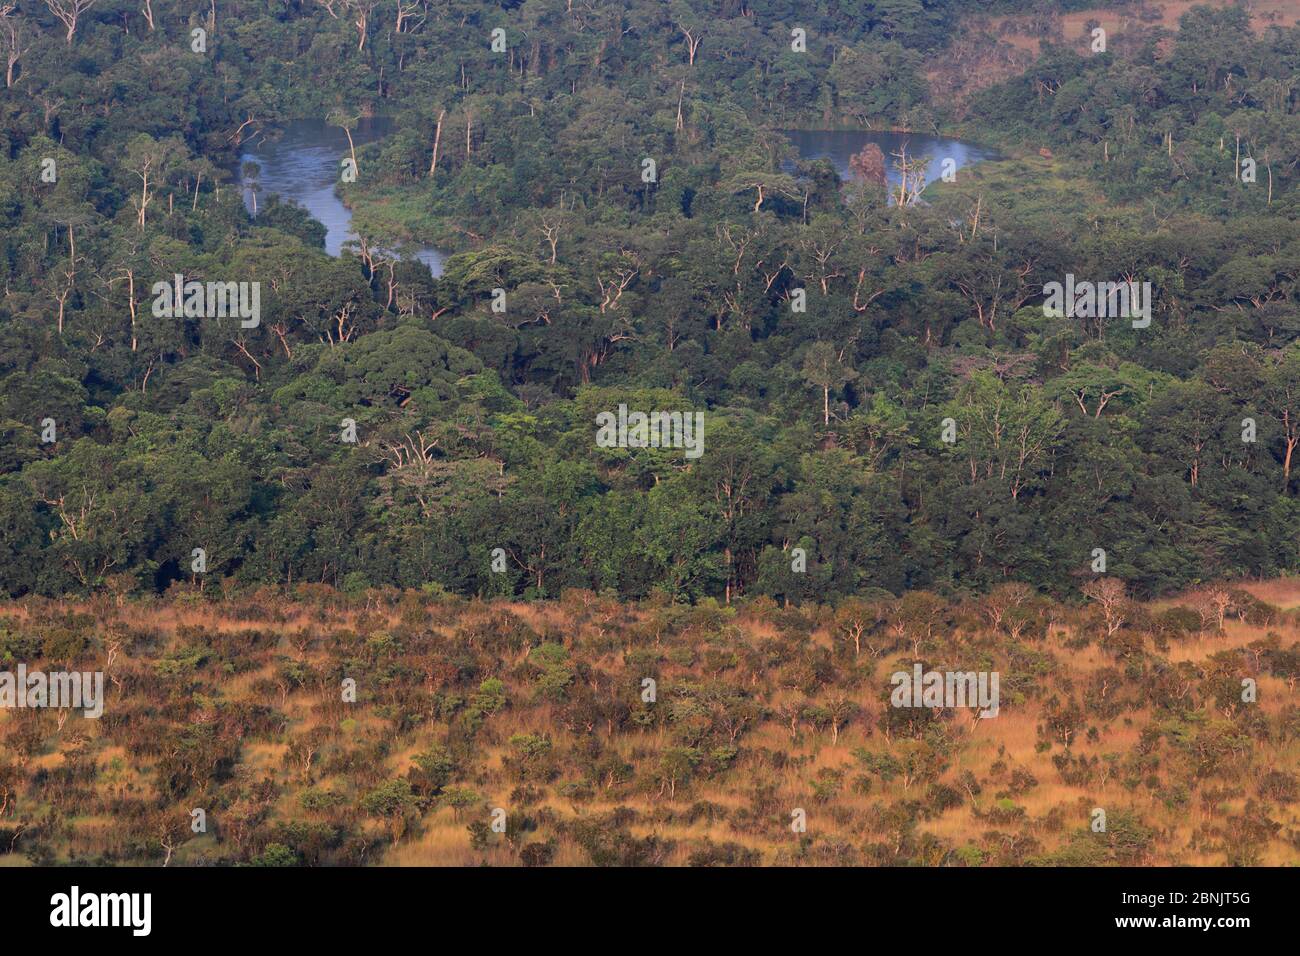 Patchwork of savannah and gallery forest, Bateke Plateau NP, Gabon. Stock Photo